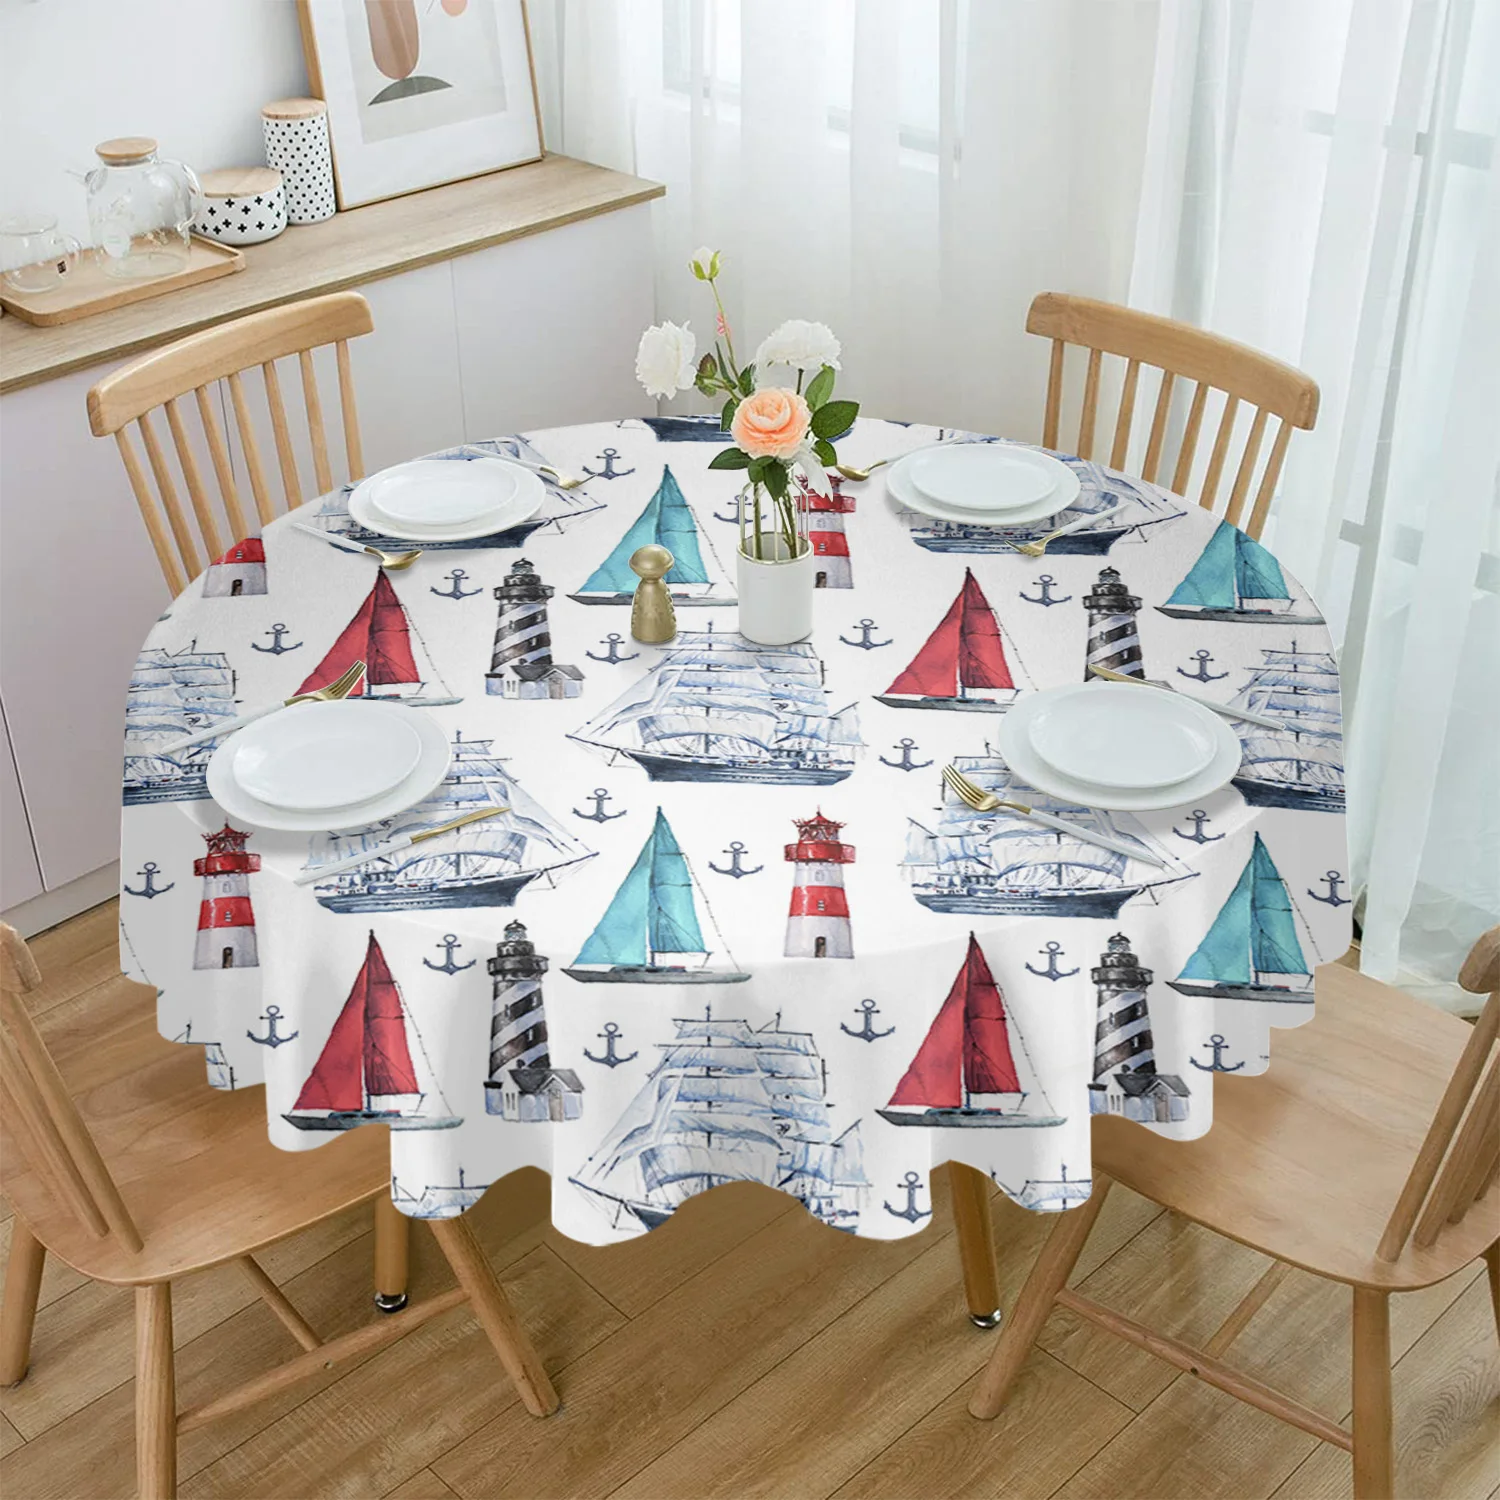 

Summer Ocean Sailing Lighthouse Round Table Cloth Festival Dining Waterproof Tablecloth Table Cover for Wedding Party Decor